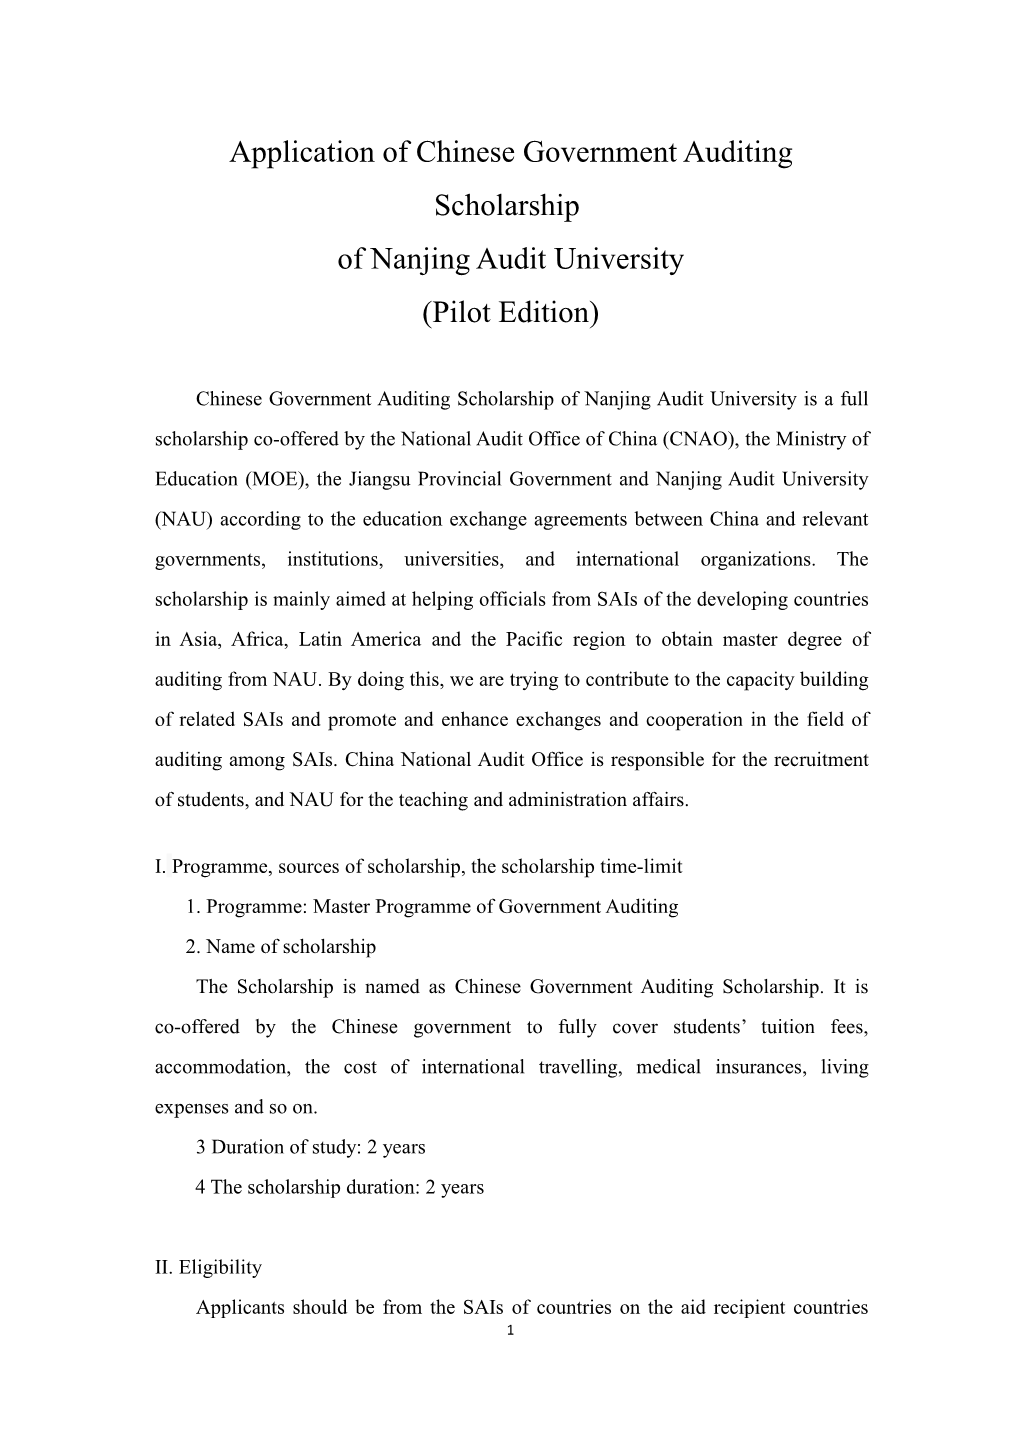 Application of Chinese Government Auditing Scholarship of Nanjing Audit University (Pilot Edition)